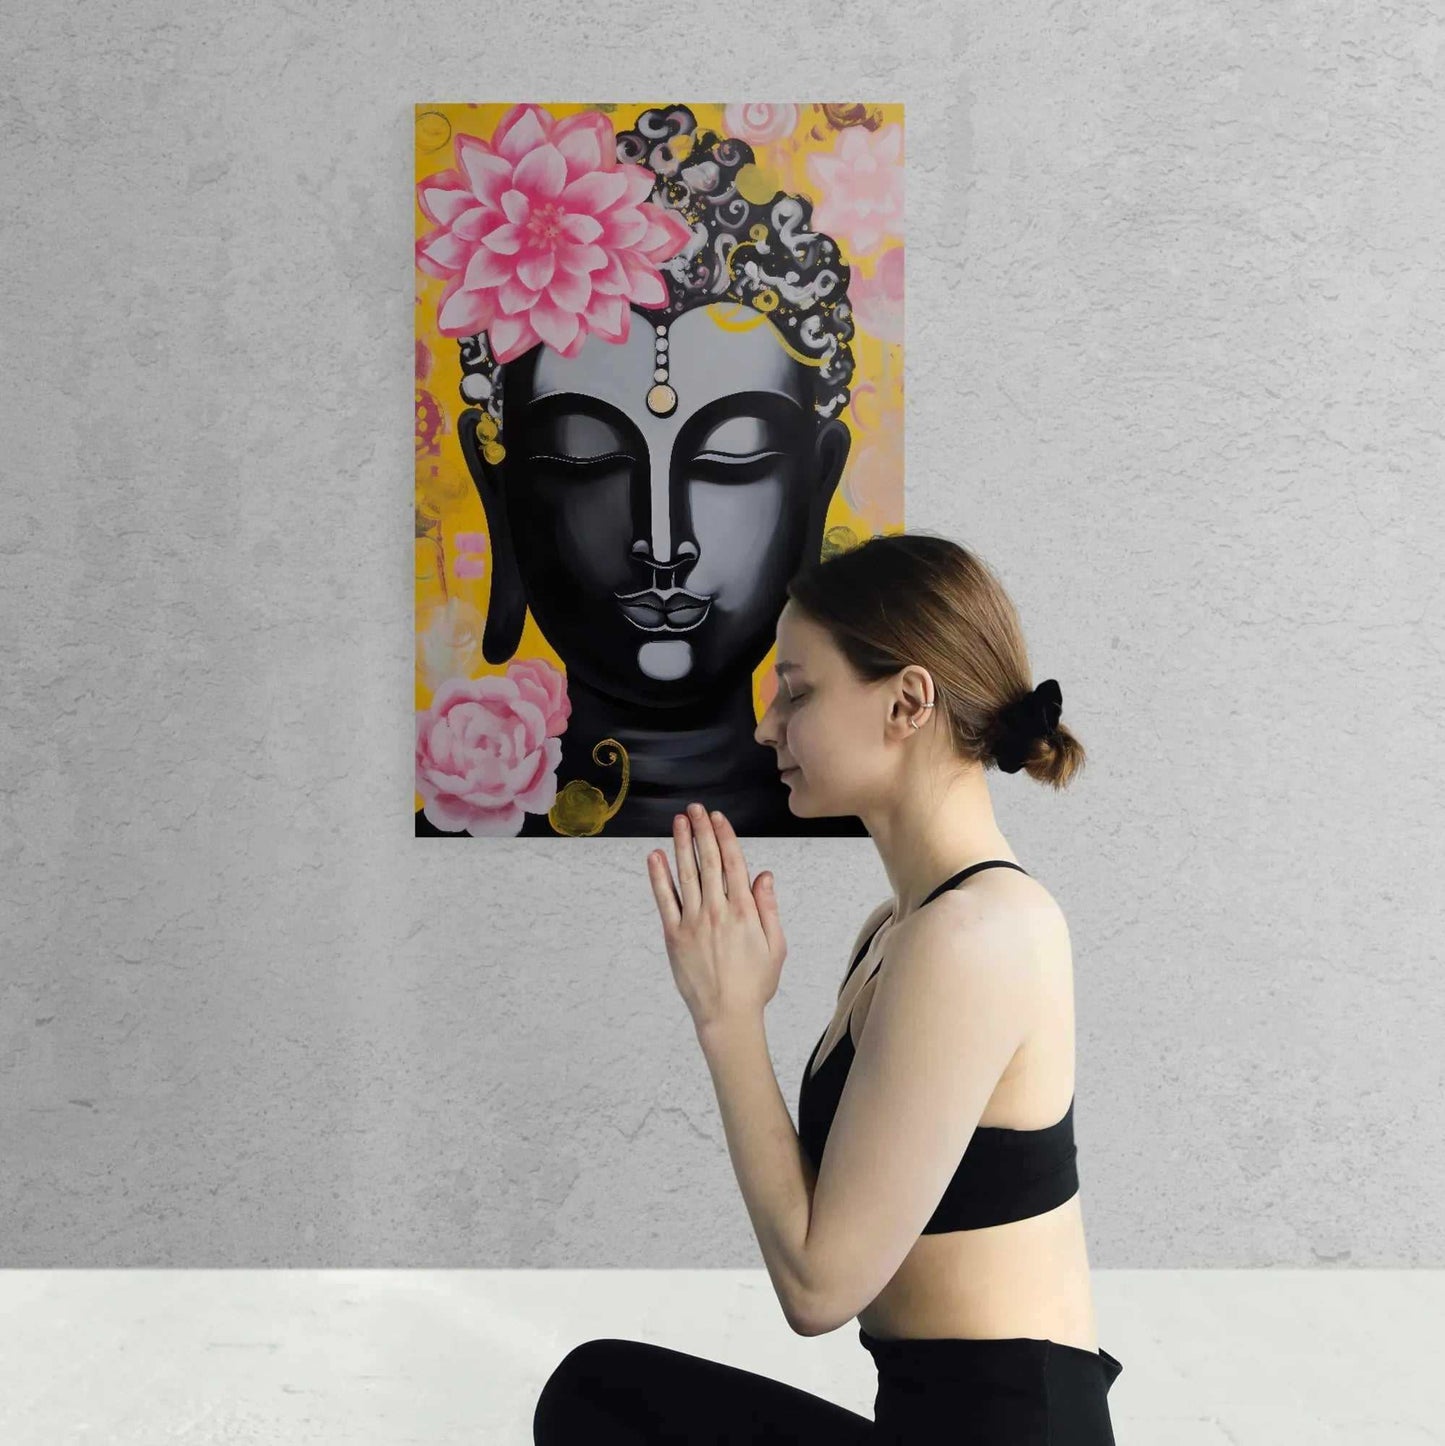 Woman in a meditative pose in front of a vibrant Buddha painting with floral designs and a yellow background, radiating a sense of peace.